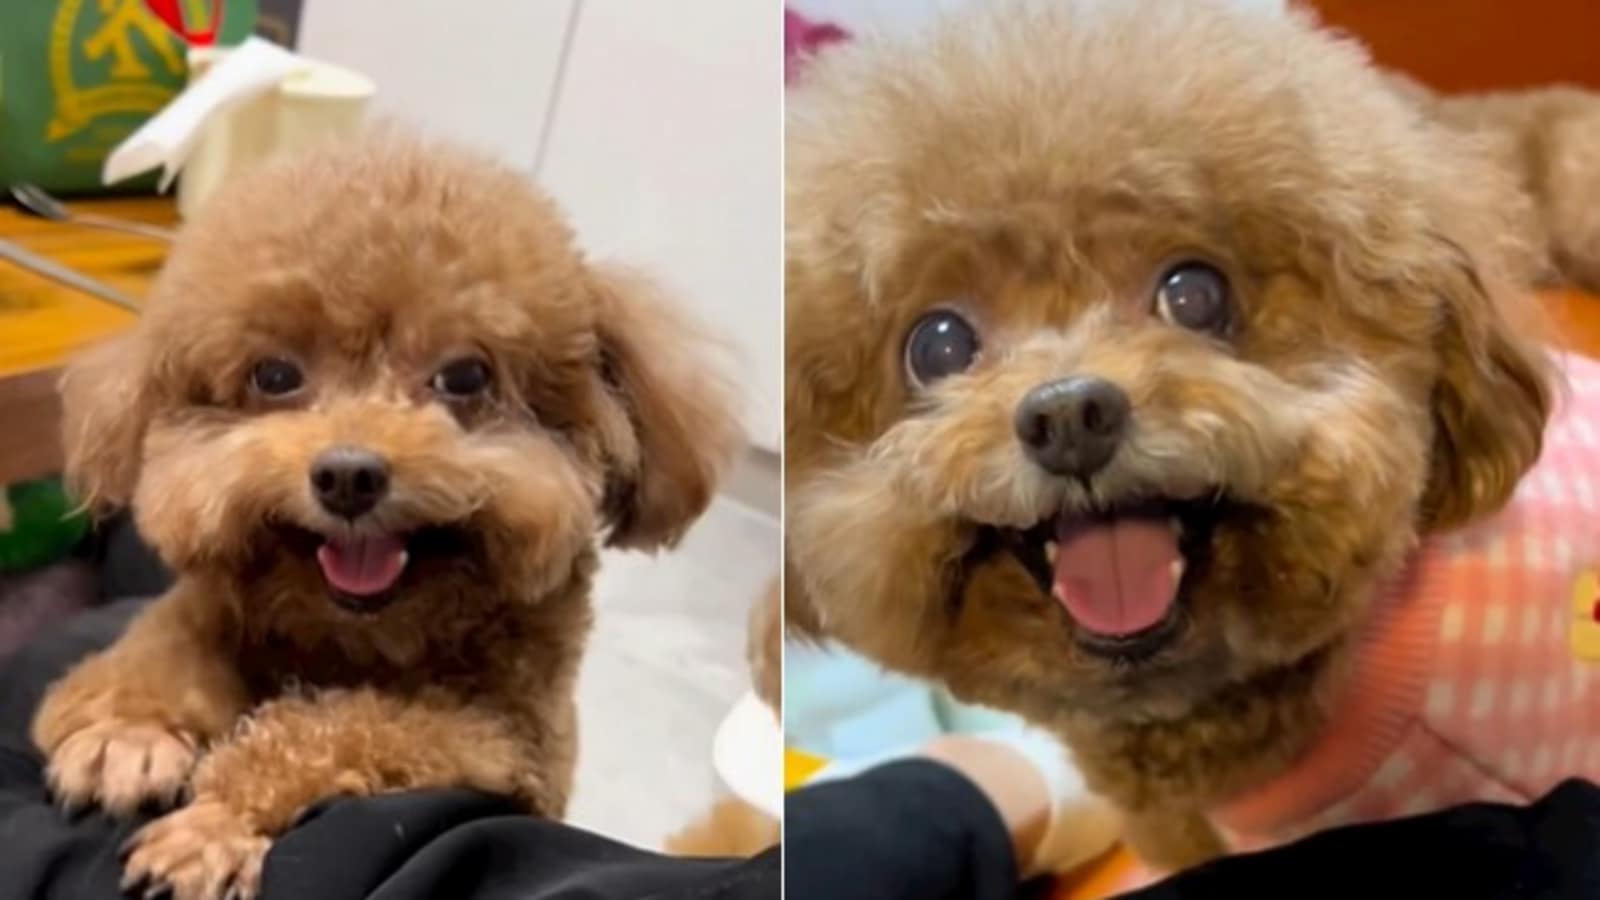 ‘World’s happiest dogs’: Poodles go viral for their adorable smiles